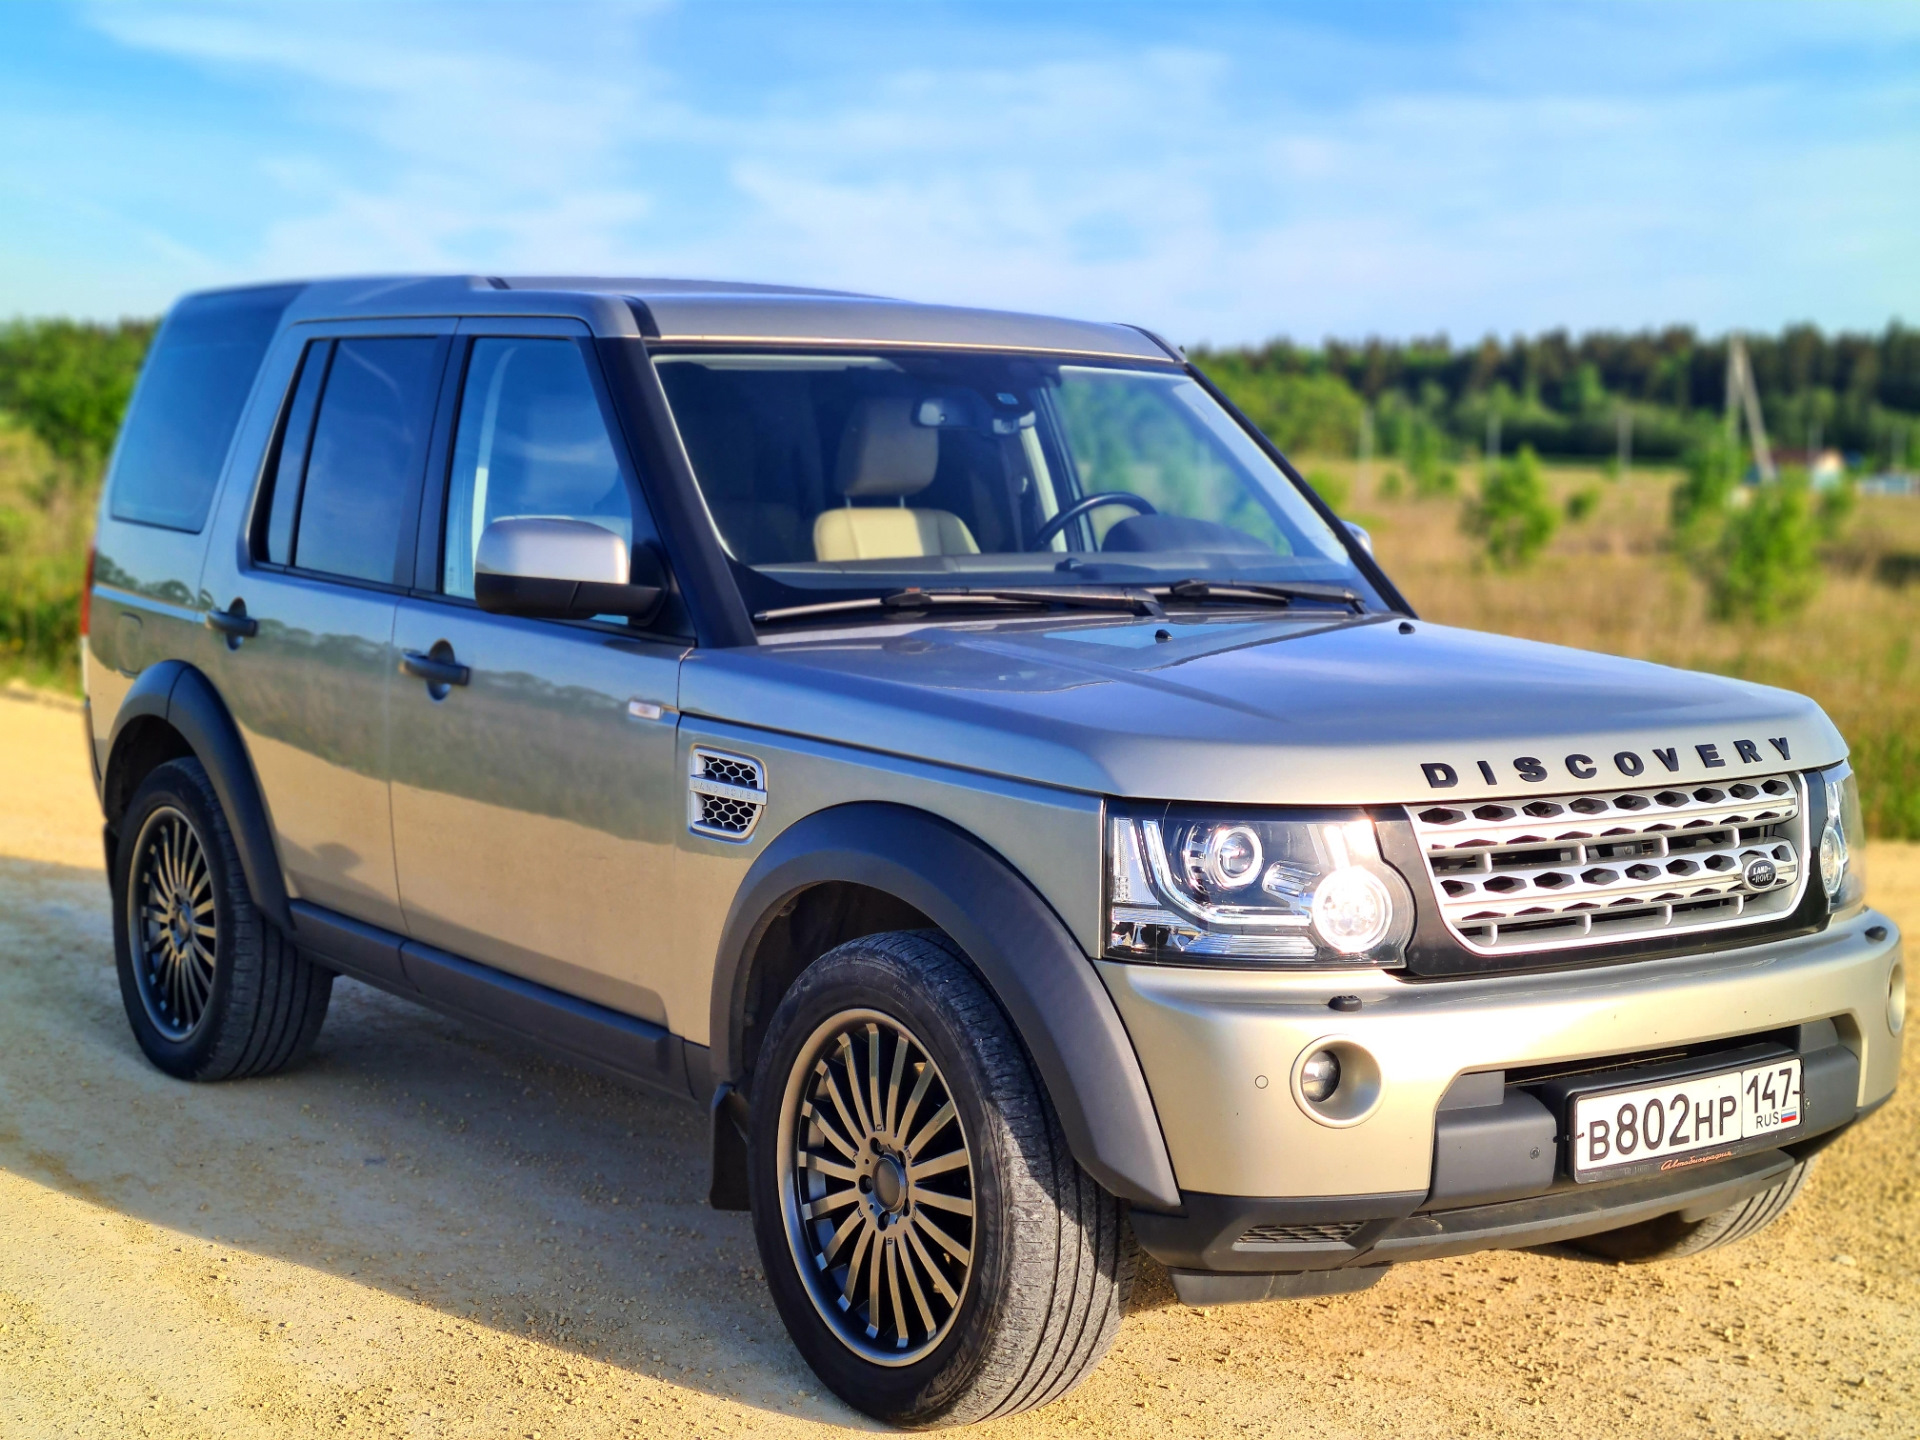 Дискавери 16. Land Rover Discovery 4. Land Rover Discovery 2. Land Rover Discovery 3. Land Rover Discovery 4 2016.